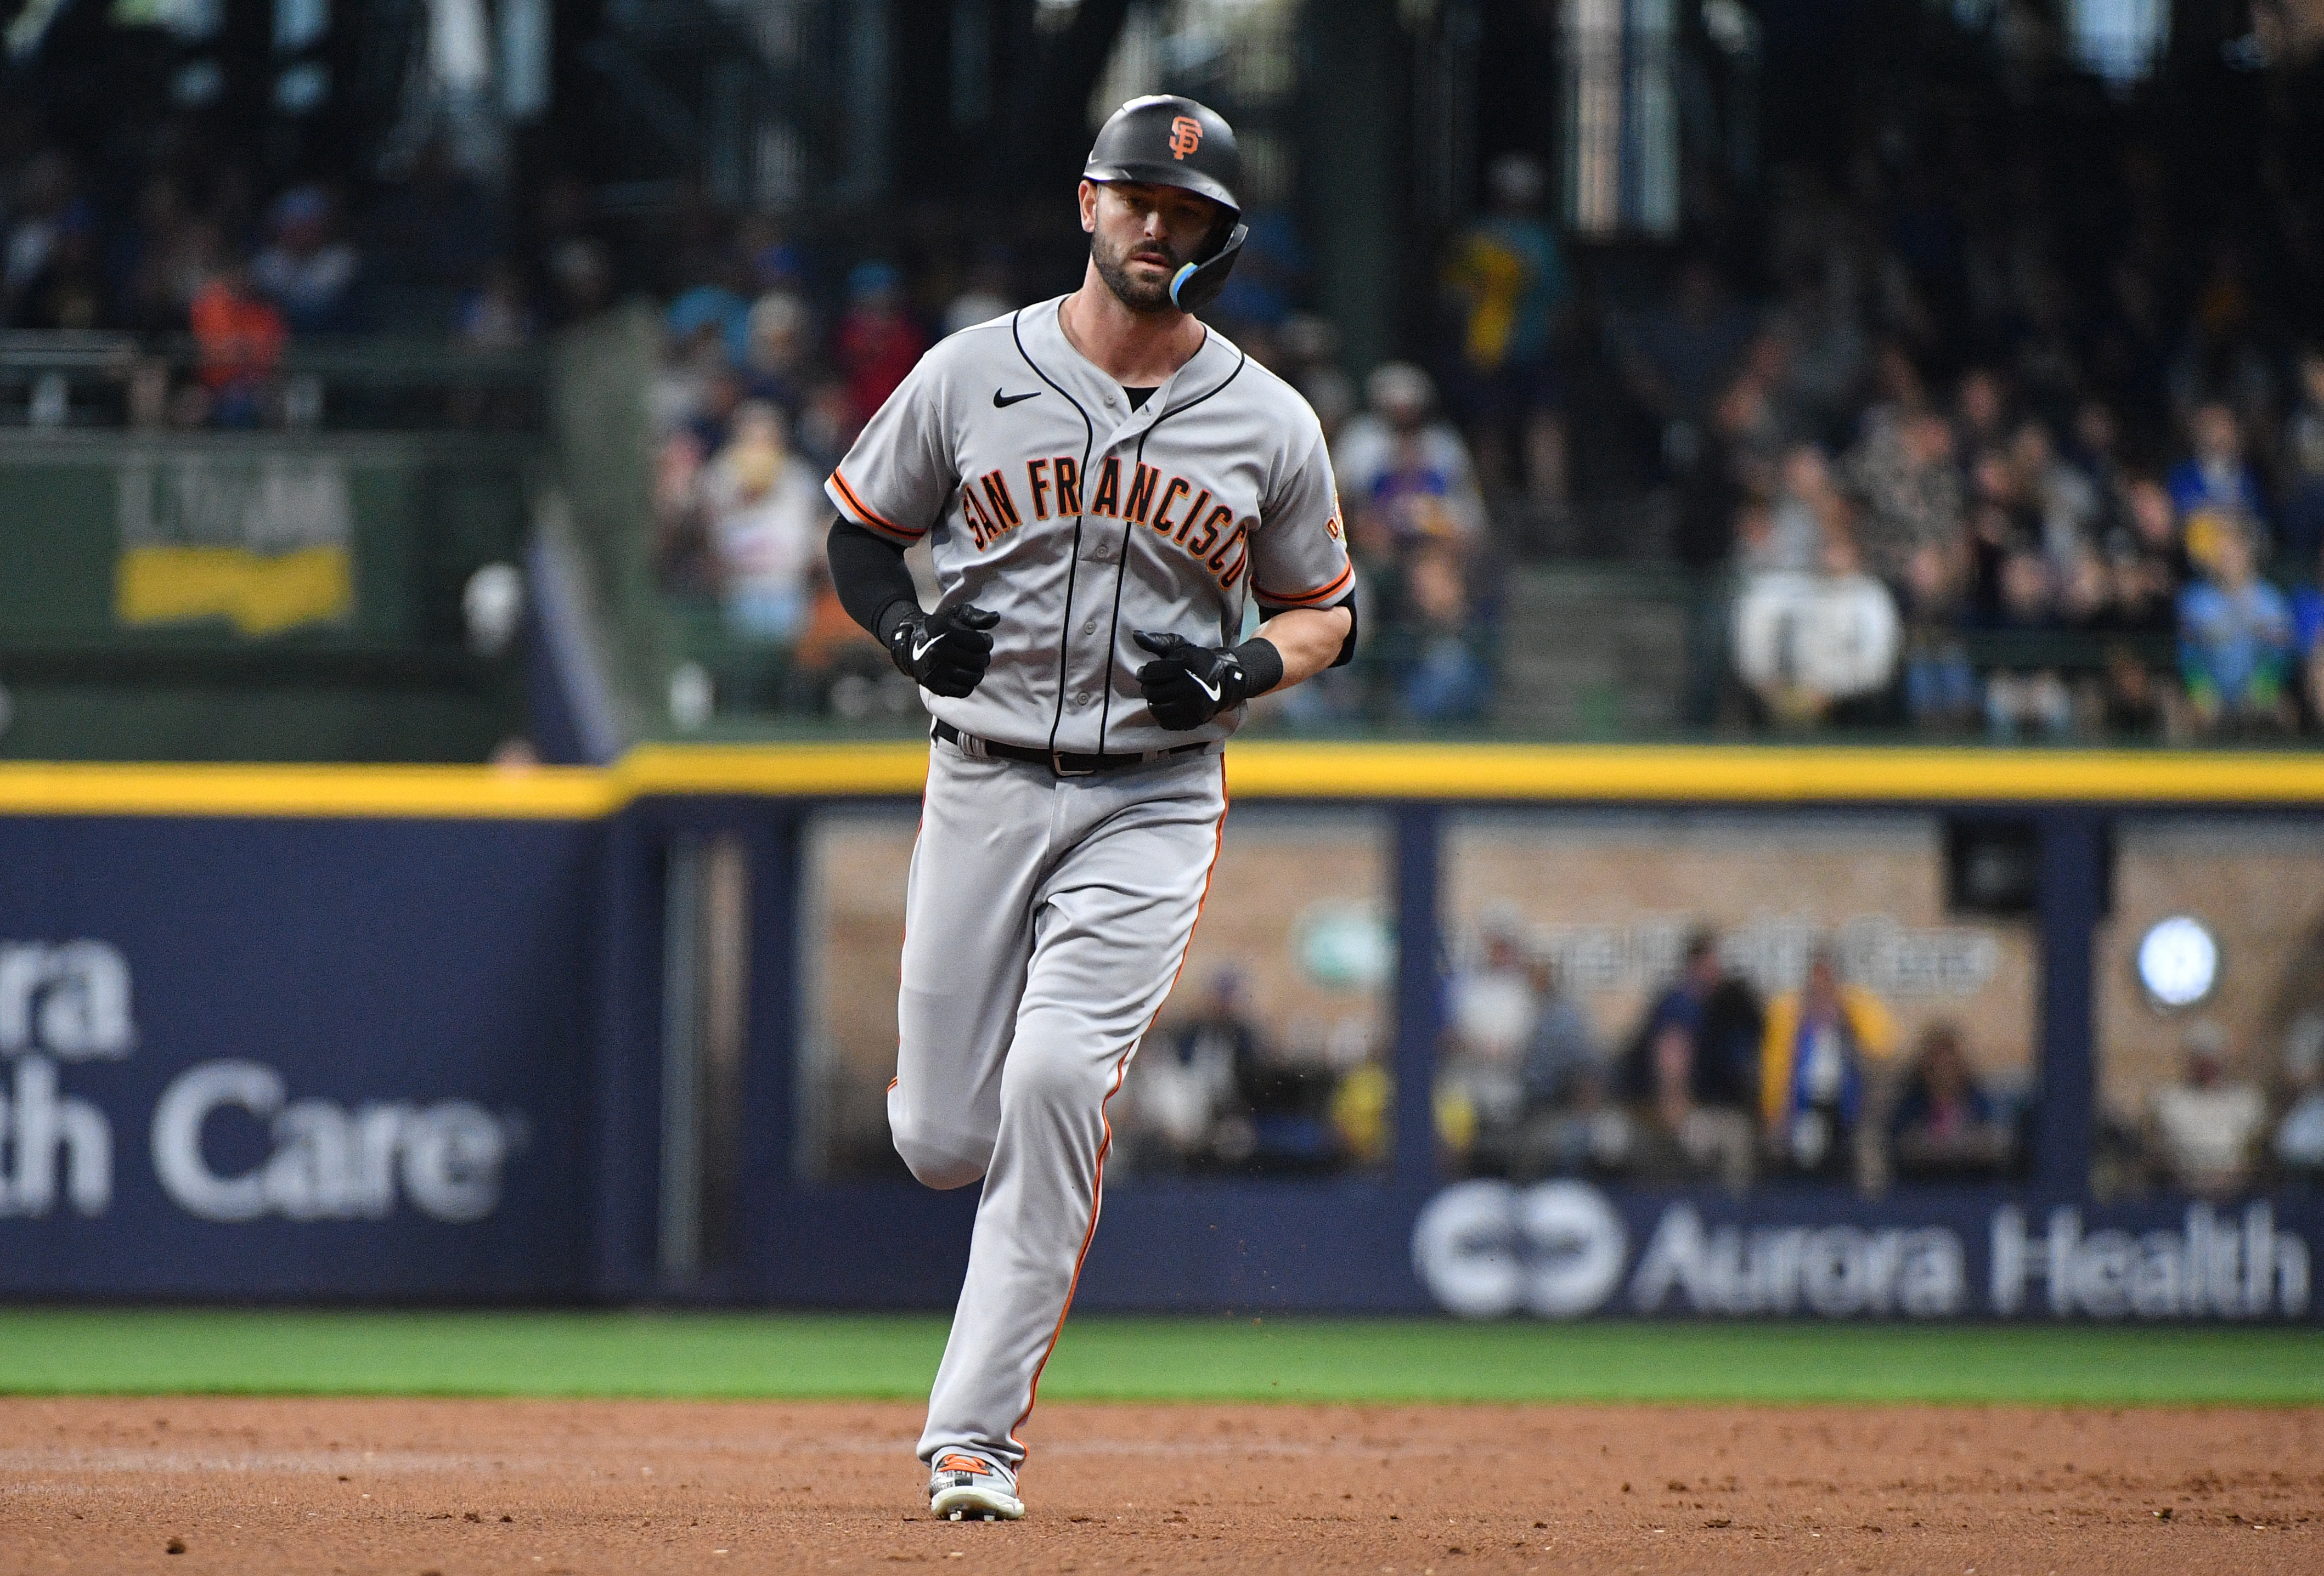 Giants move above .500 with rout of Brewers